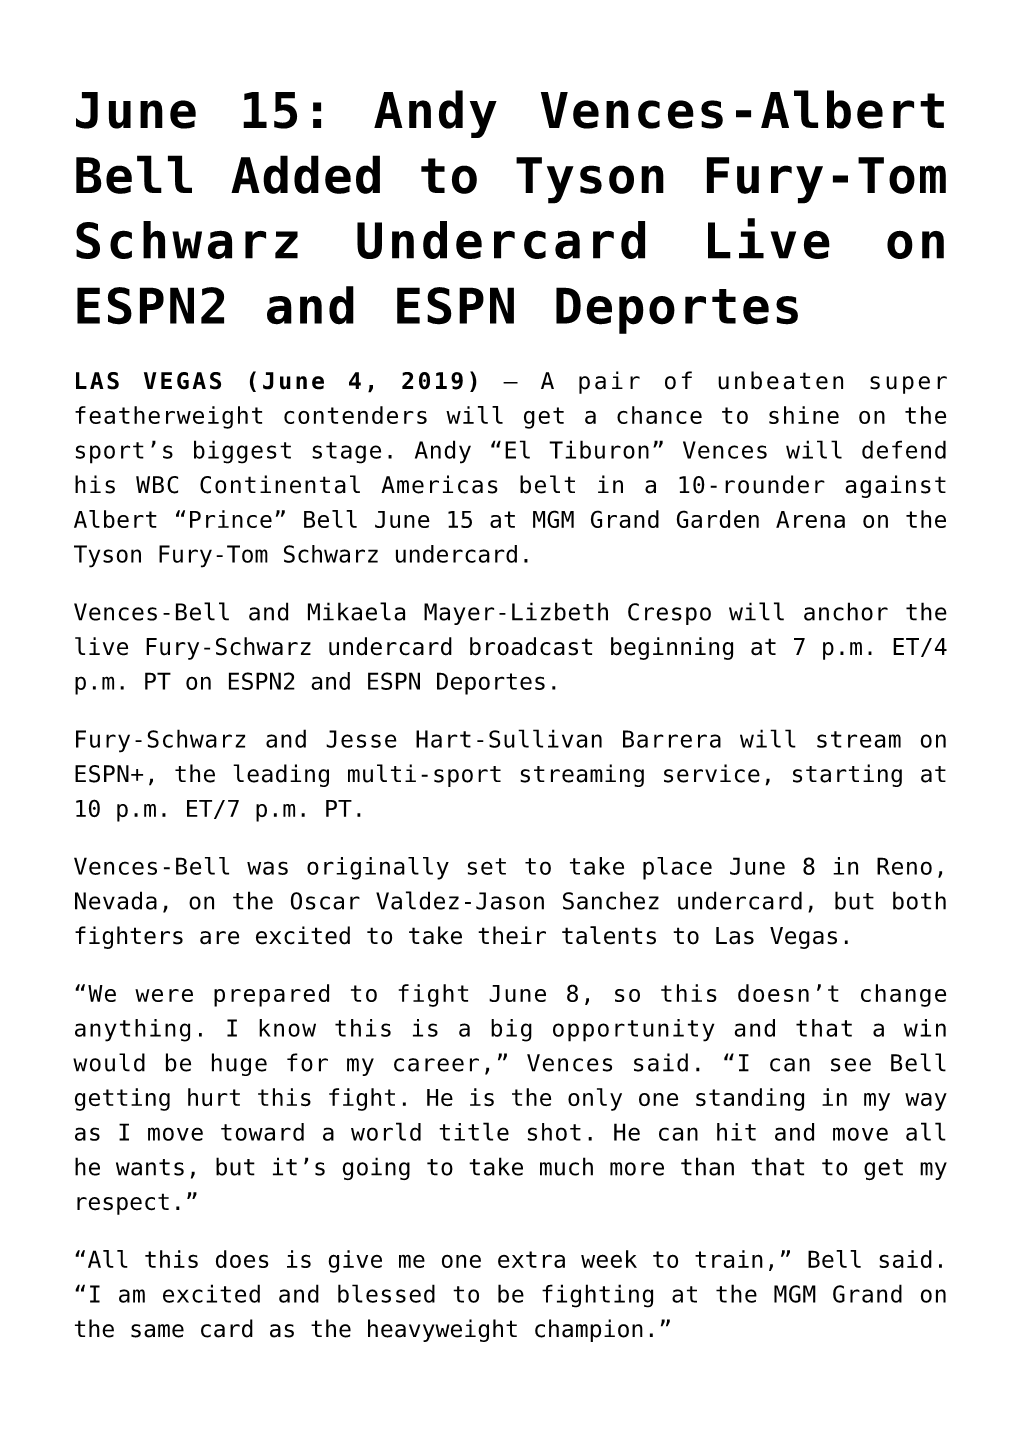 June 15: Andy Vences-Albert Bell Added to Tyson Fury-Tom Schwarz Undercard Live on ESPN2 and ESPN Deportes